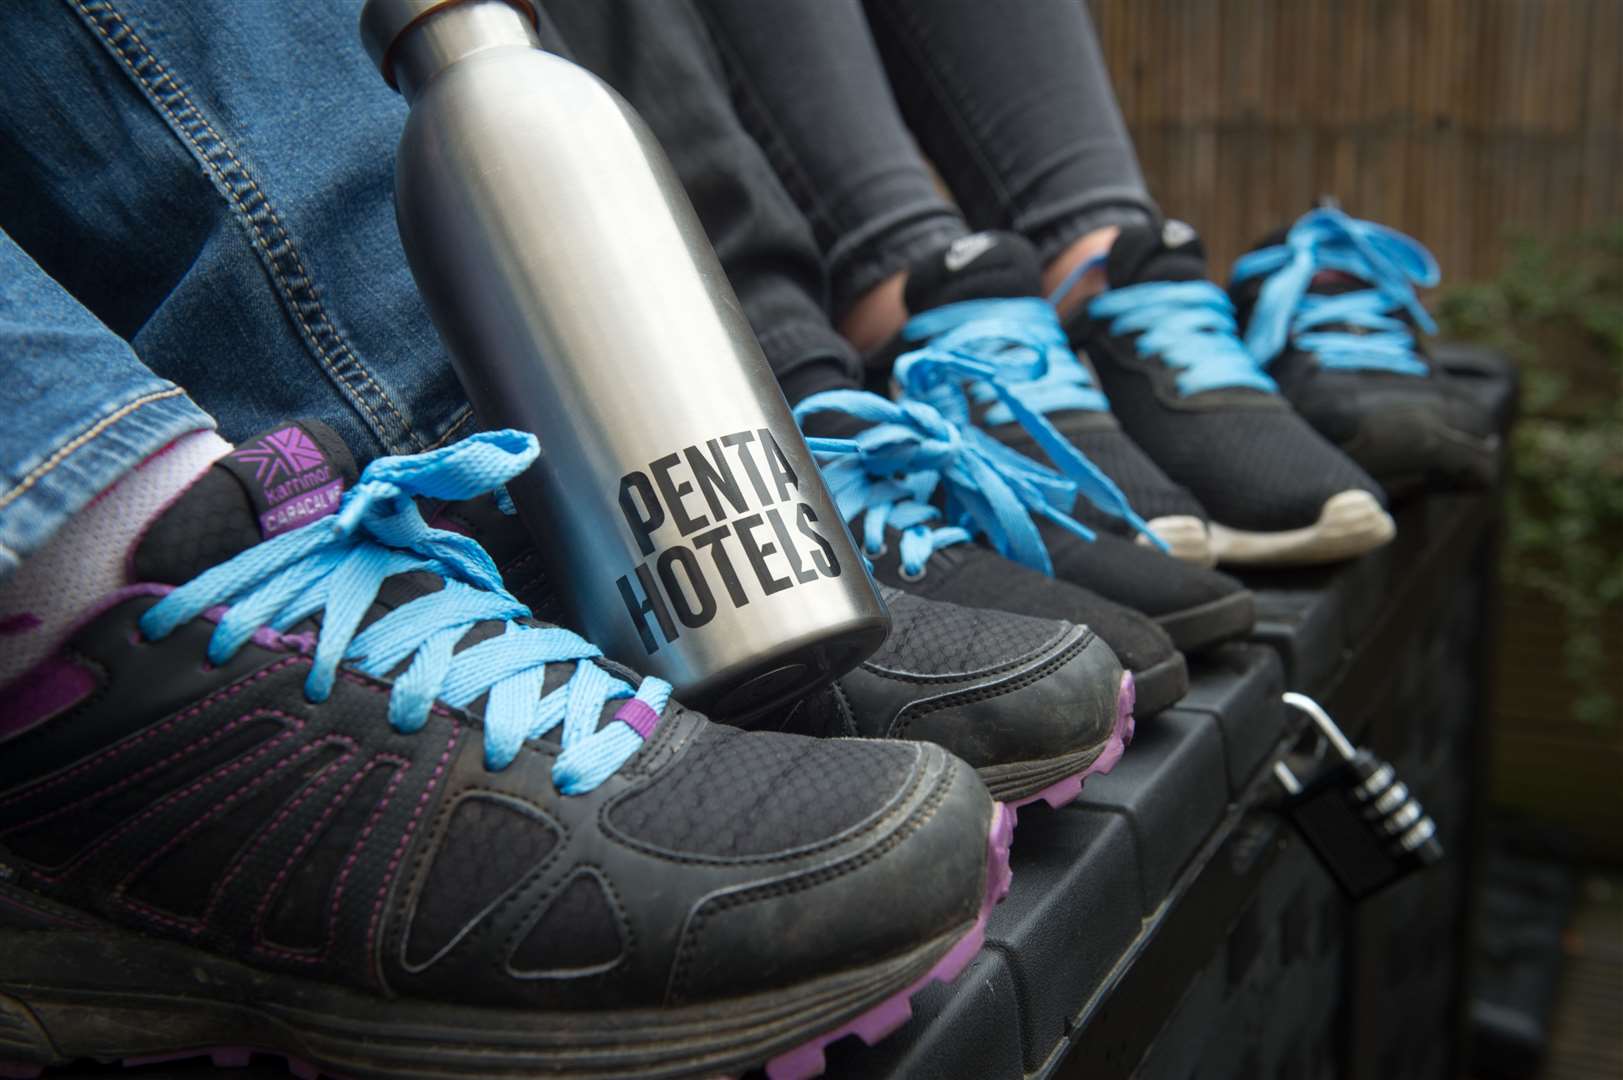 Penta Hotels staff had blue shoe laces and special water bottles.